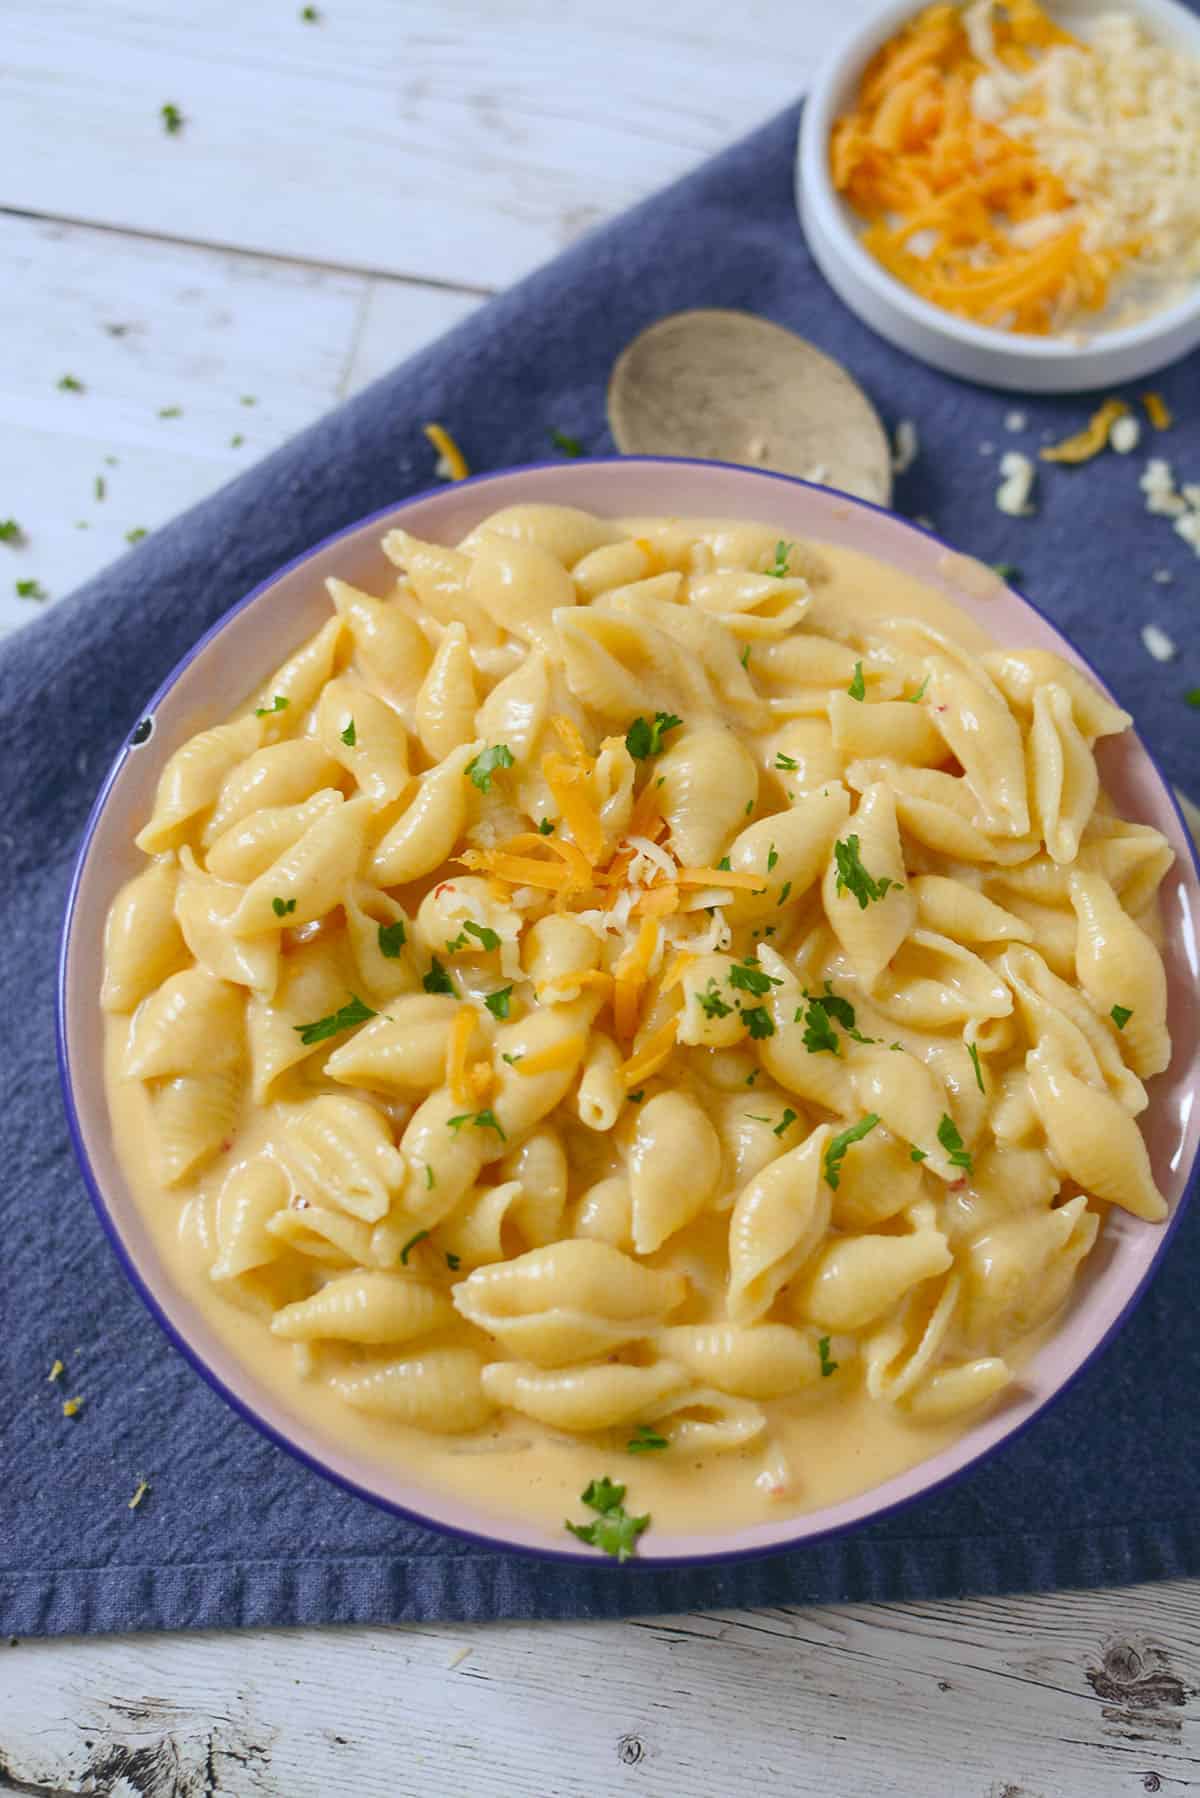 Mac and cheese in a bowl sitting on a blue napkin.